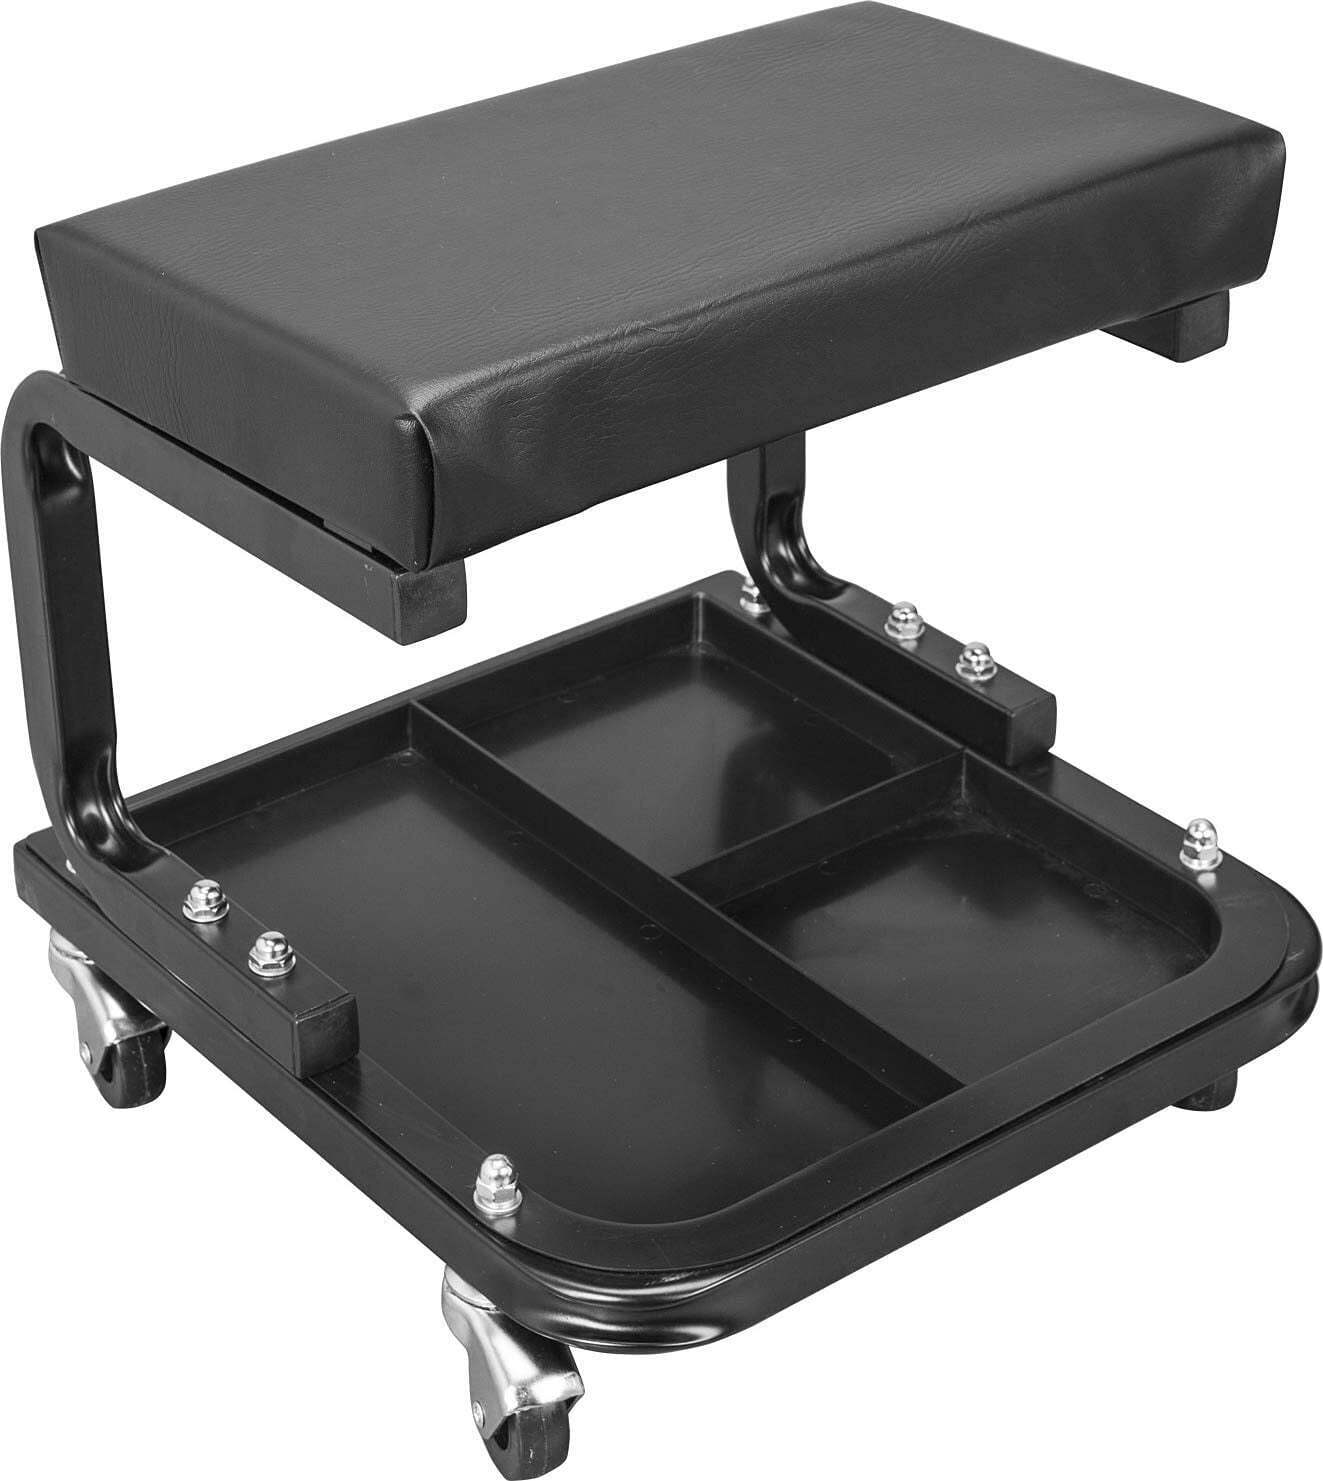 DATR6300B Rolling Creeper Garage/Shop Seat: Padded Mechanic Stool with Tool Tray